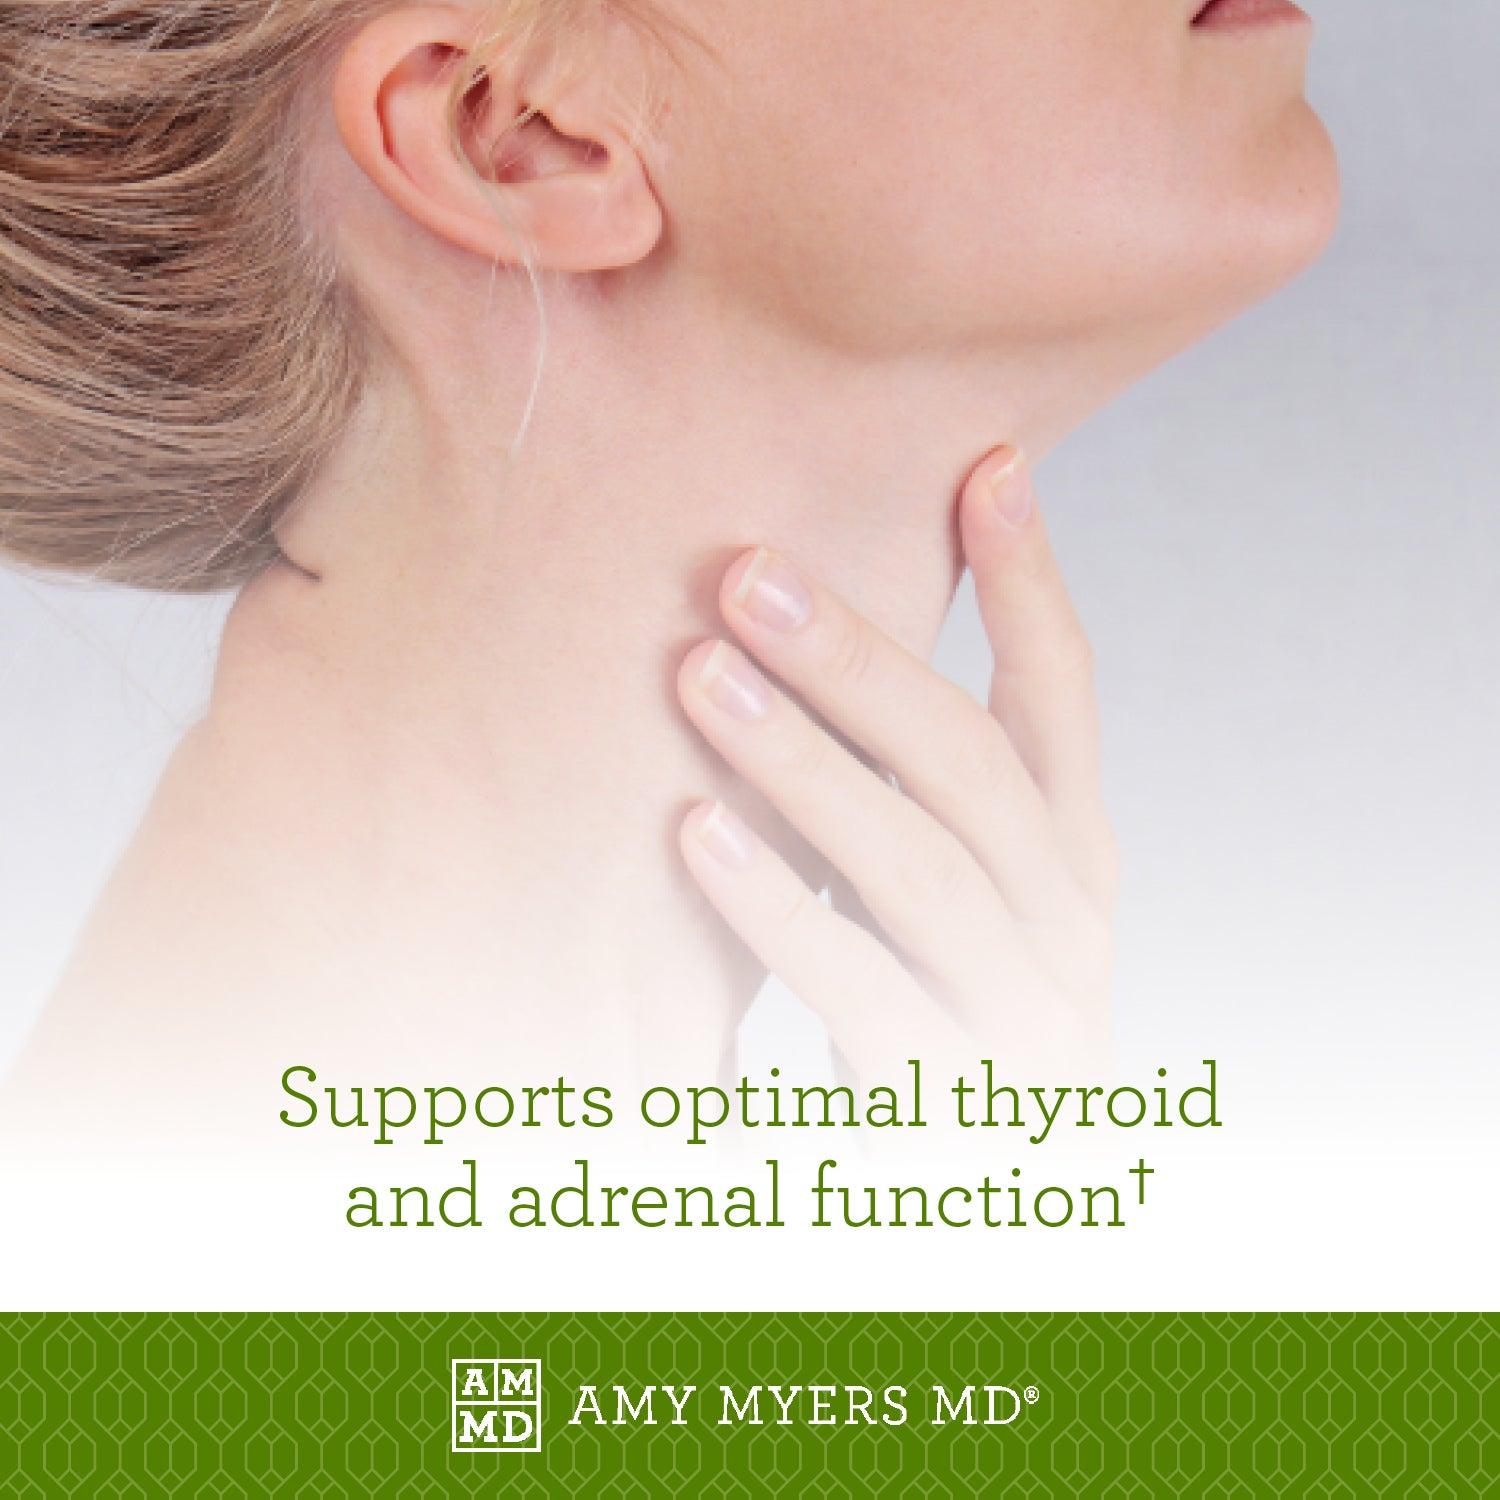 Optimal Nutrition and Energy Pack - Supports optimal thyroid function - A woman examines her neck - Amy Myers MD